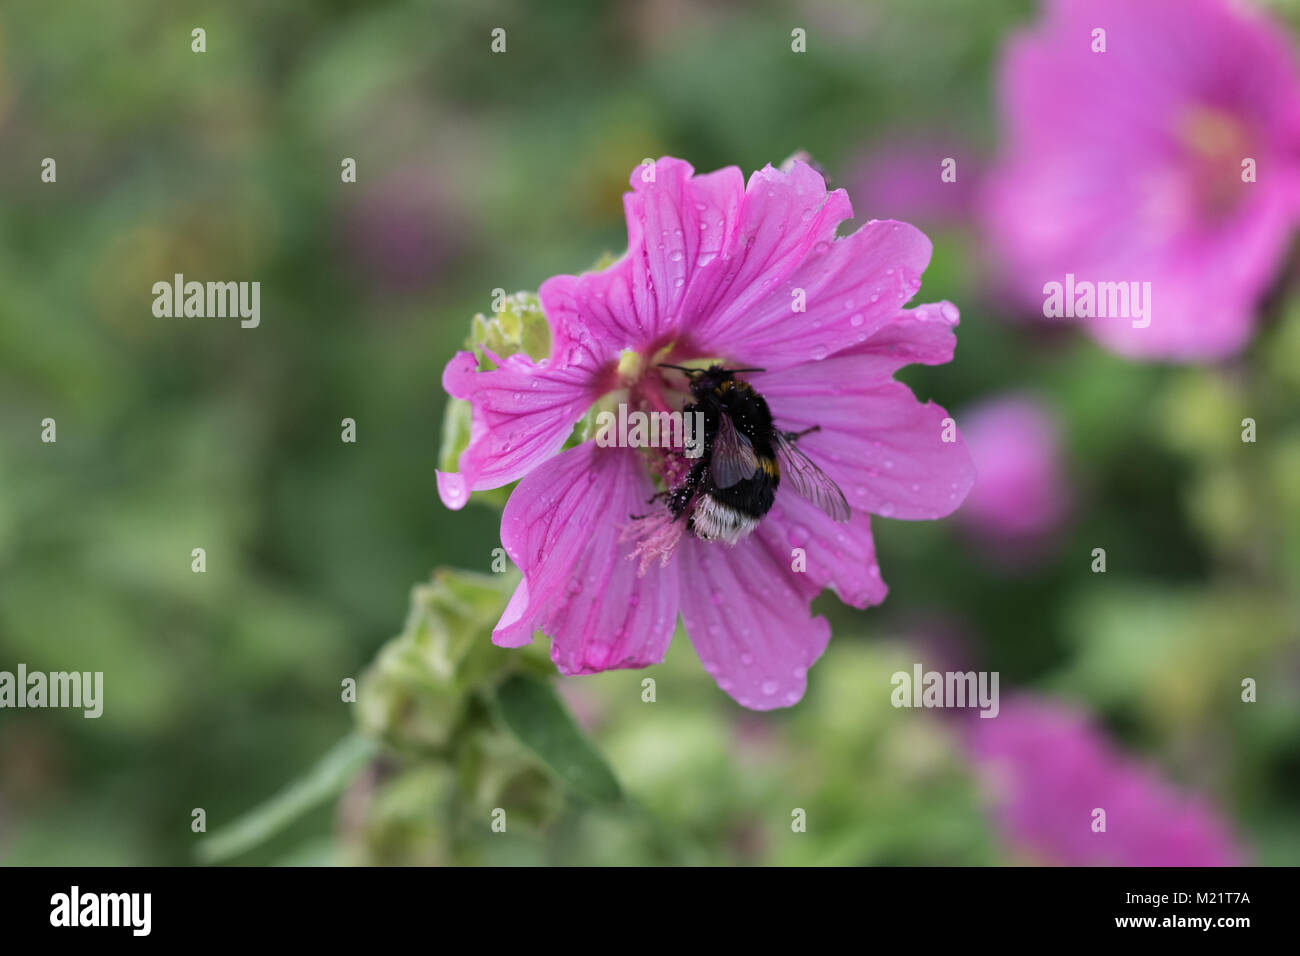 A Bumblebee on a flower. Stock Photo